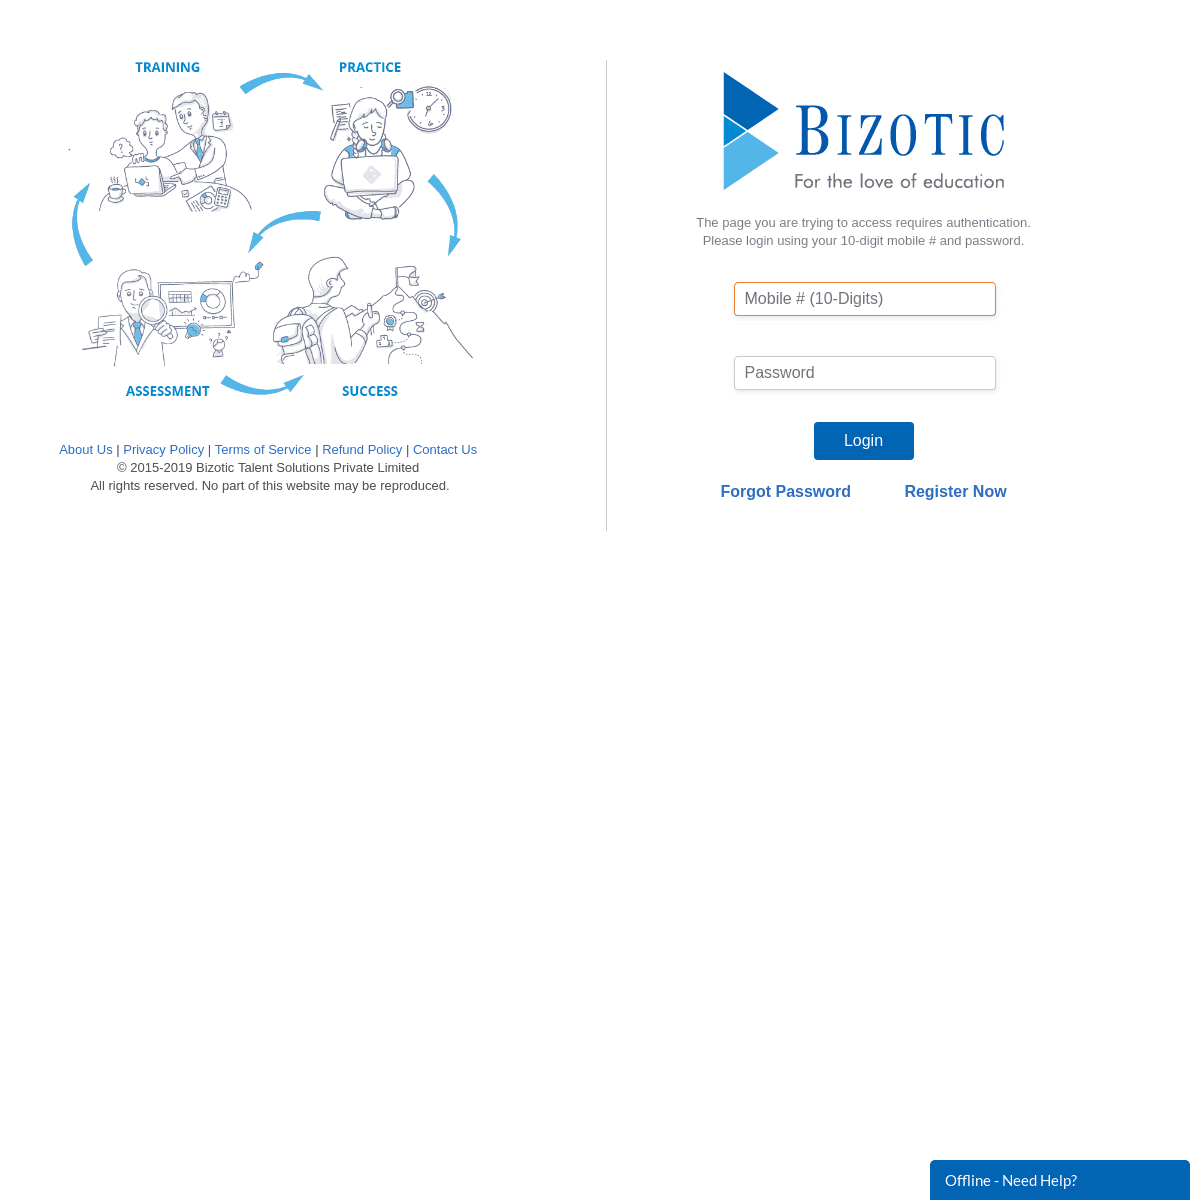 A complete backup of bizoticlearn.com